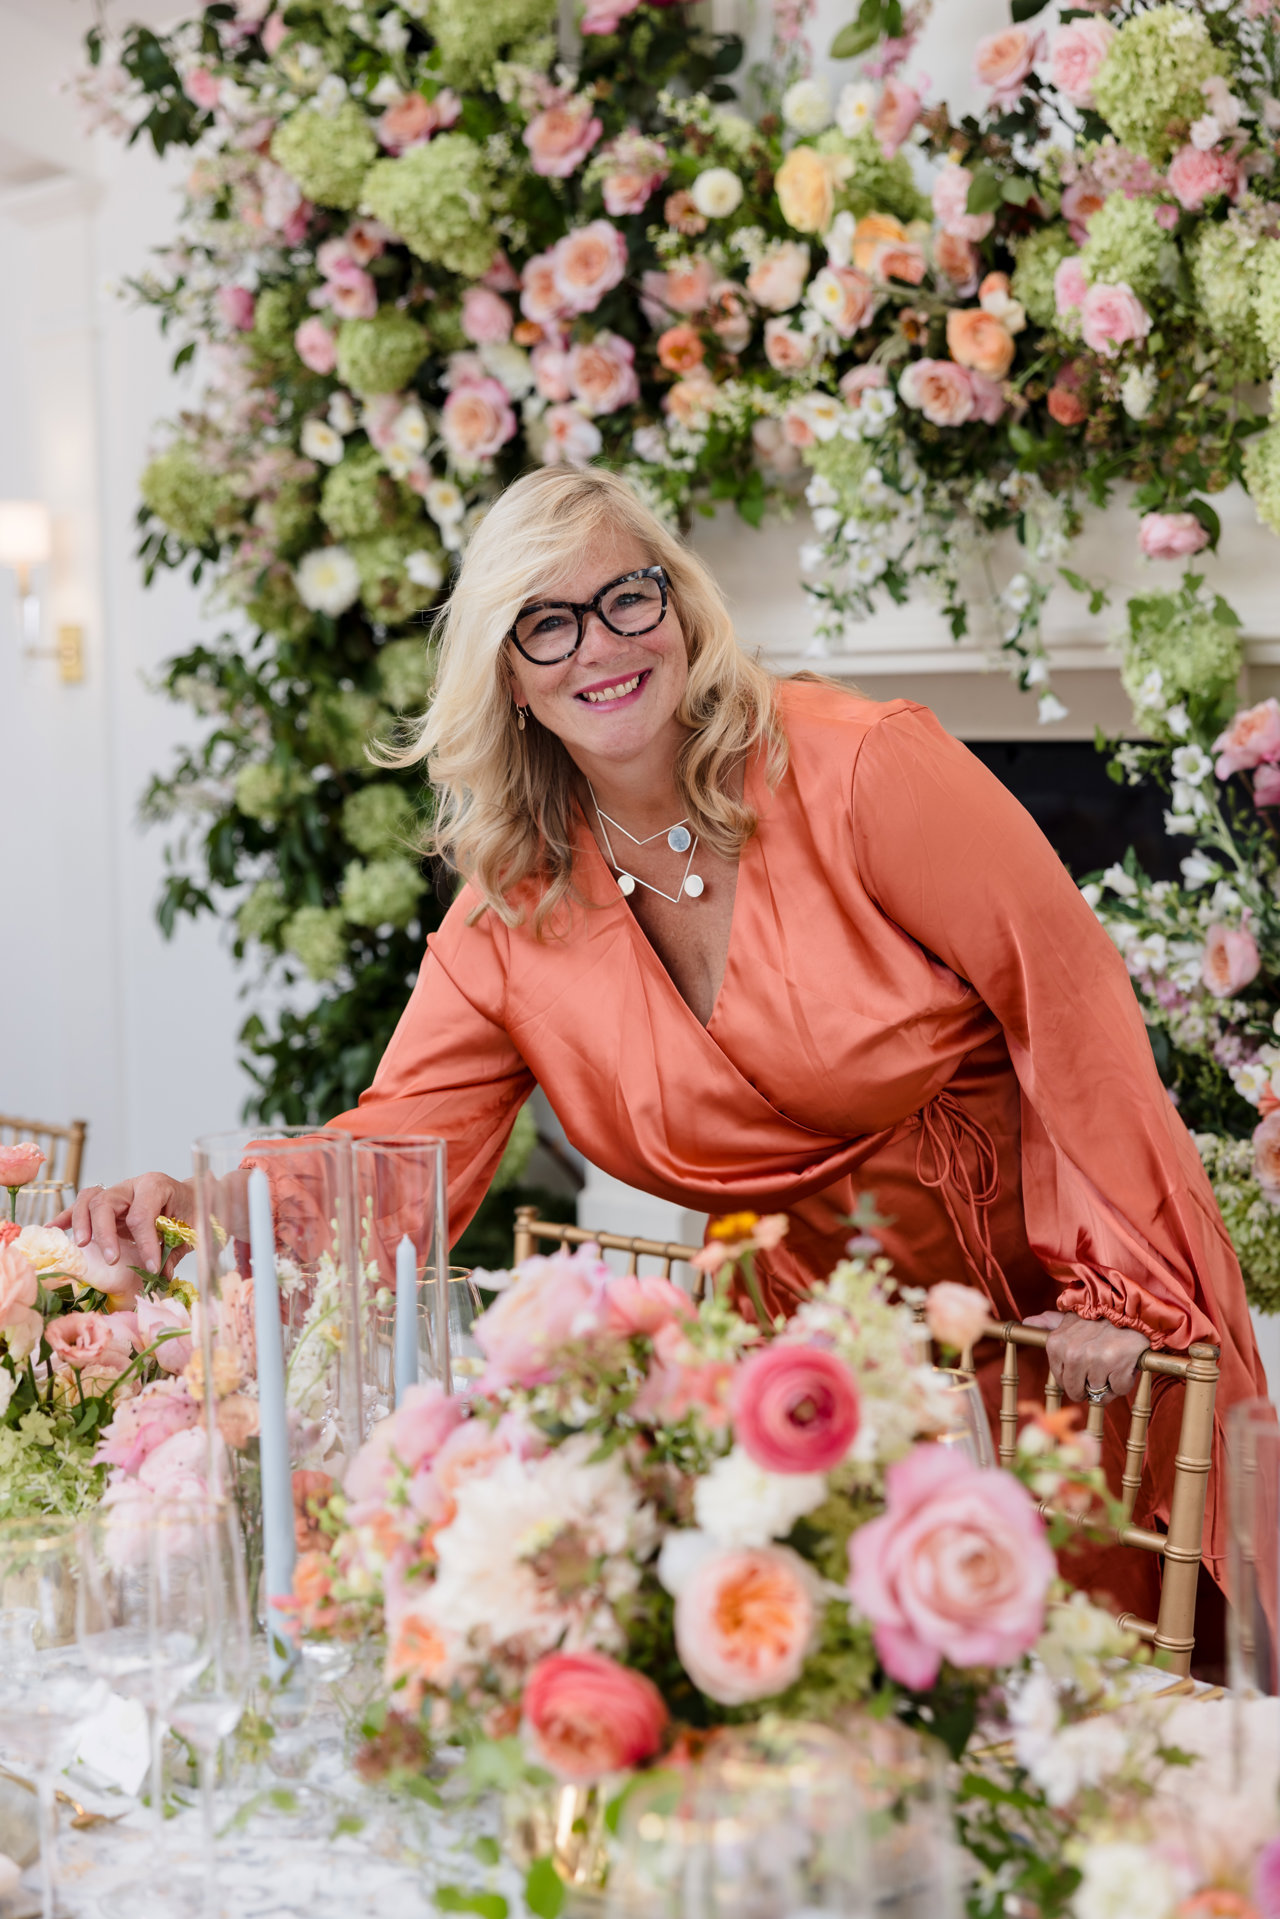 Holly Chapple, artista floral